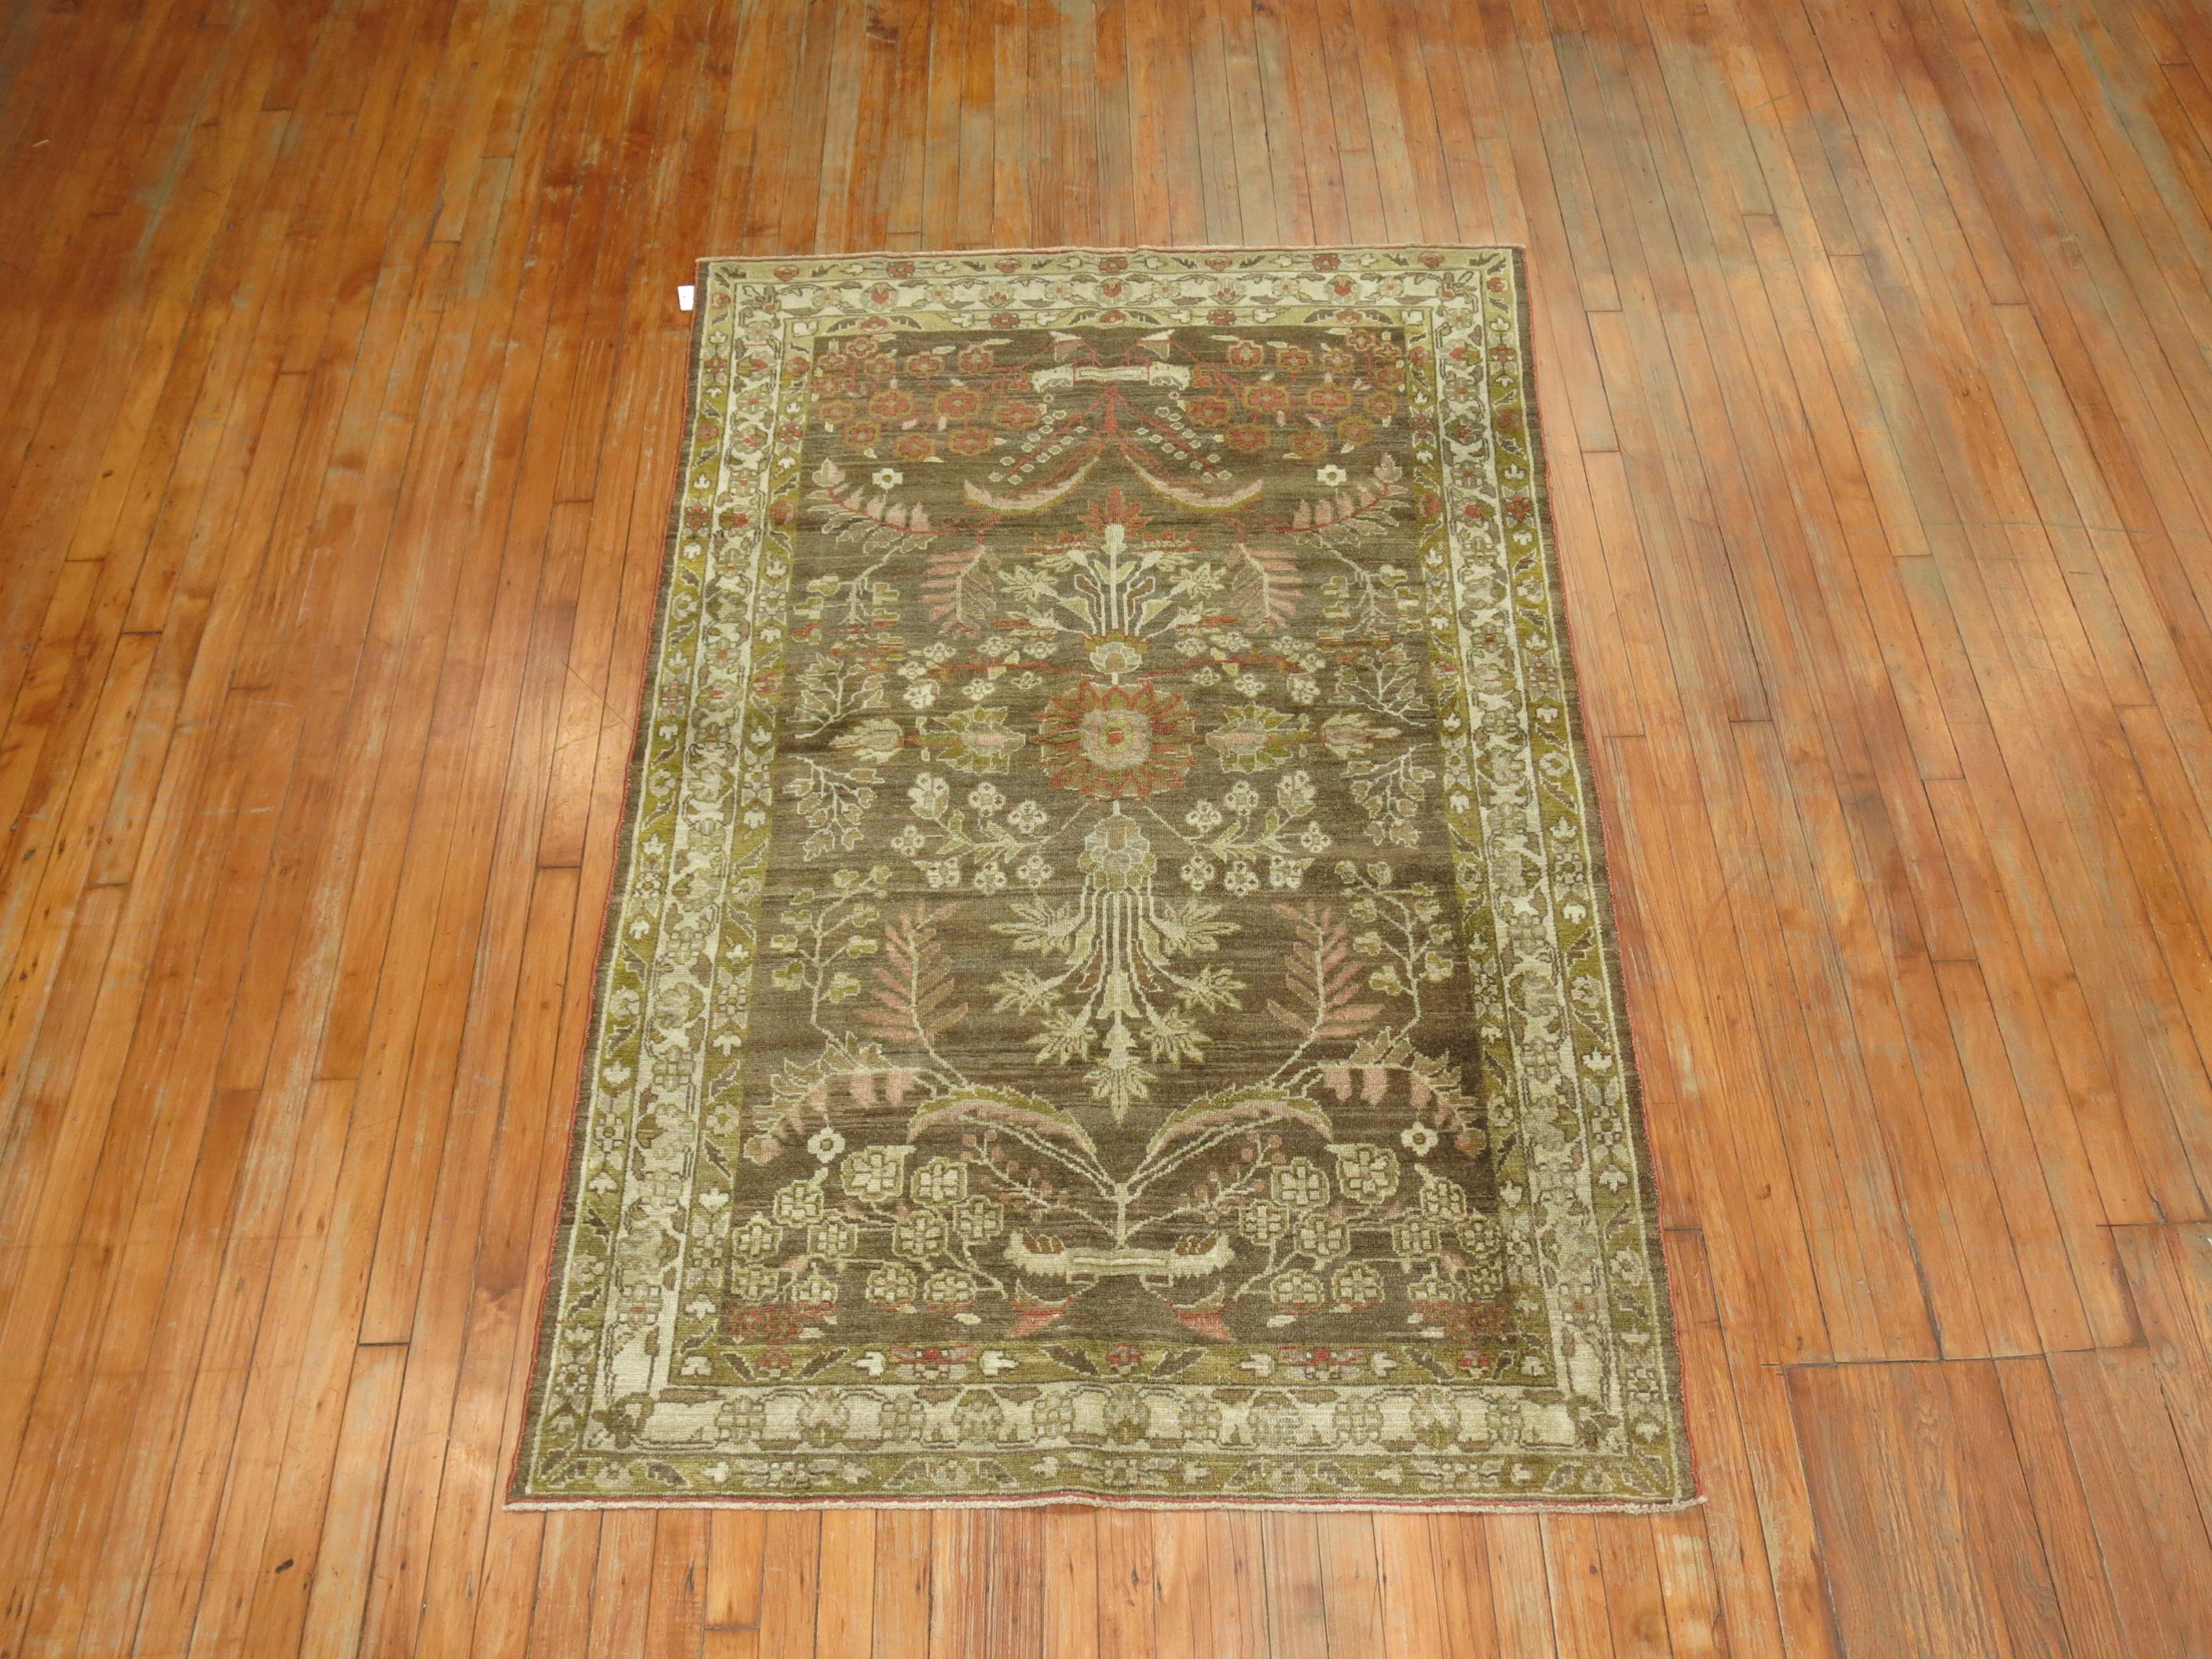 An antique Persian Malayer rug with a formal design on a brown field, copper and green accents.

Measures: 4'3” x 6'.9''.